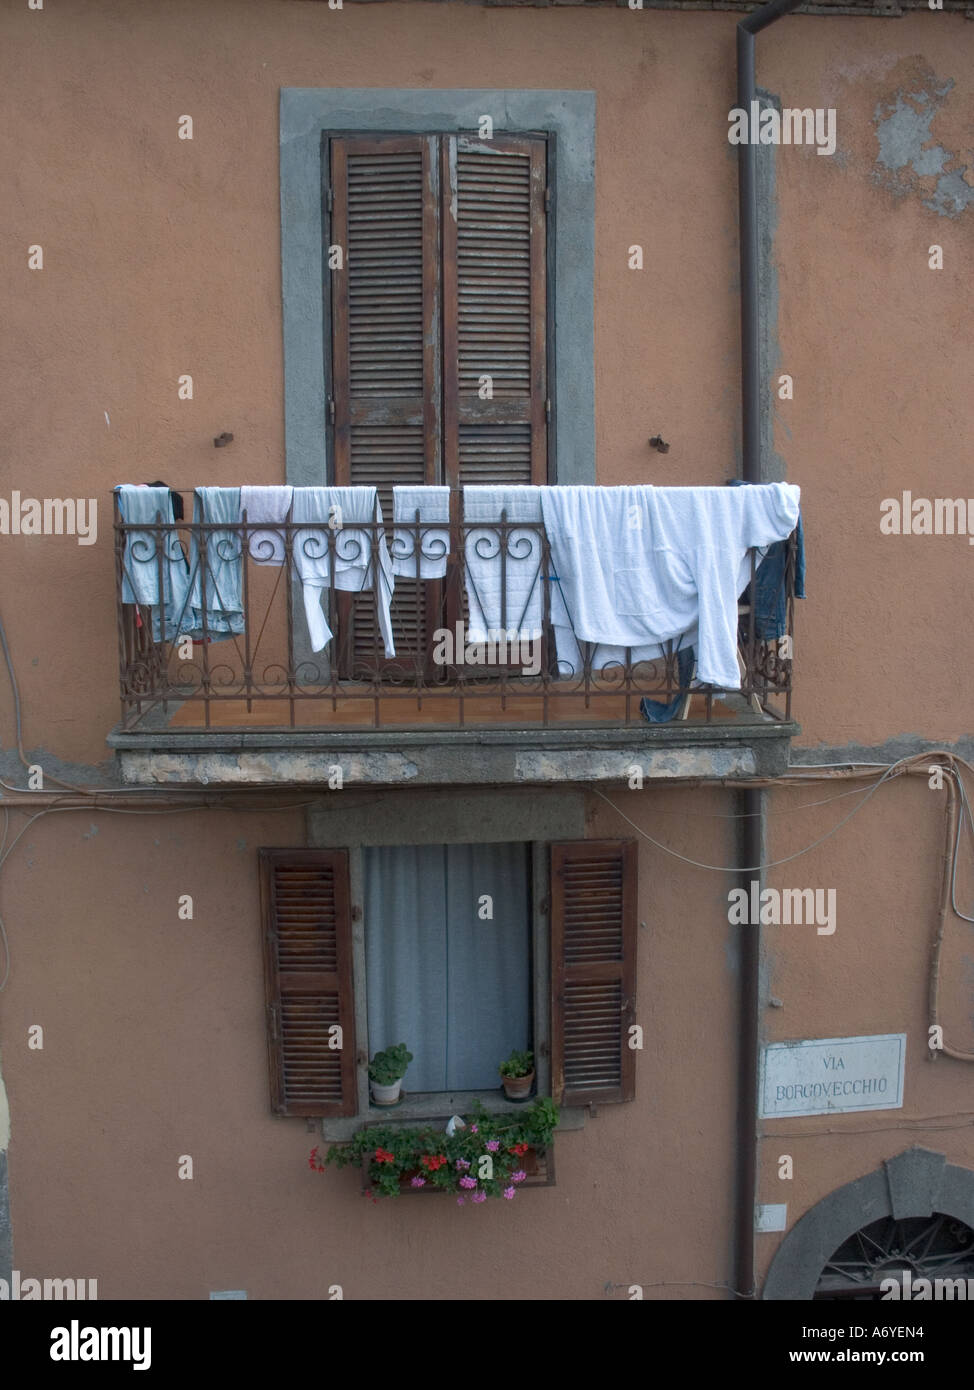 Washing hanging from a balcony in the village of St Martino Al Cimino, Italy Stock Photo